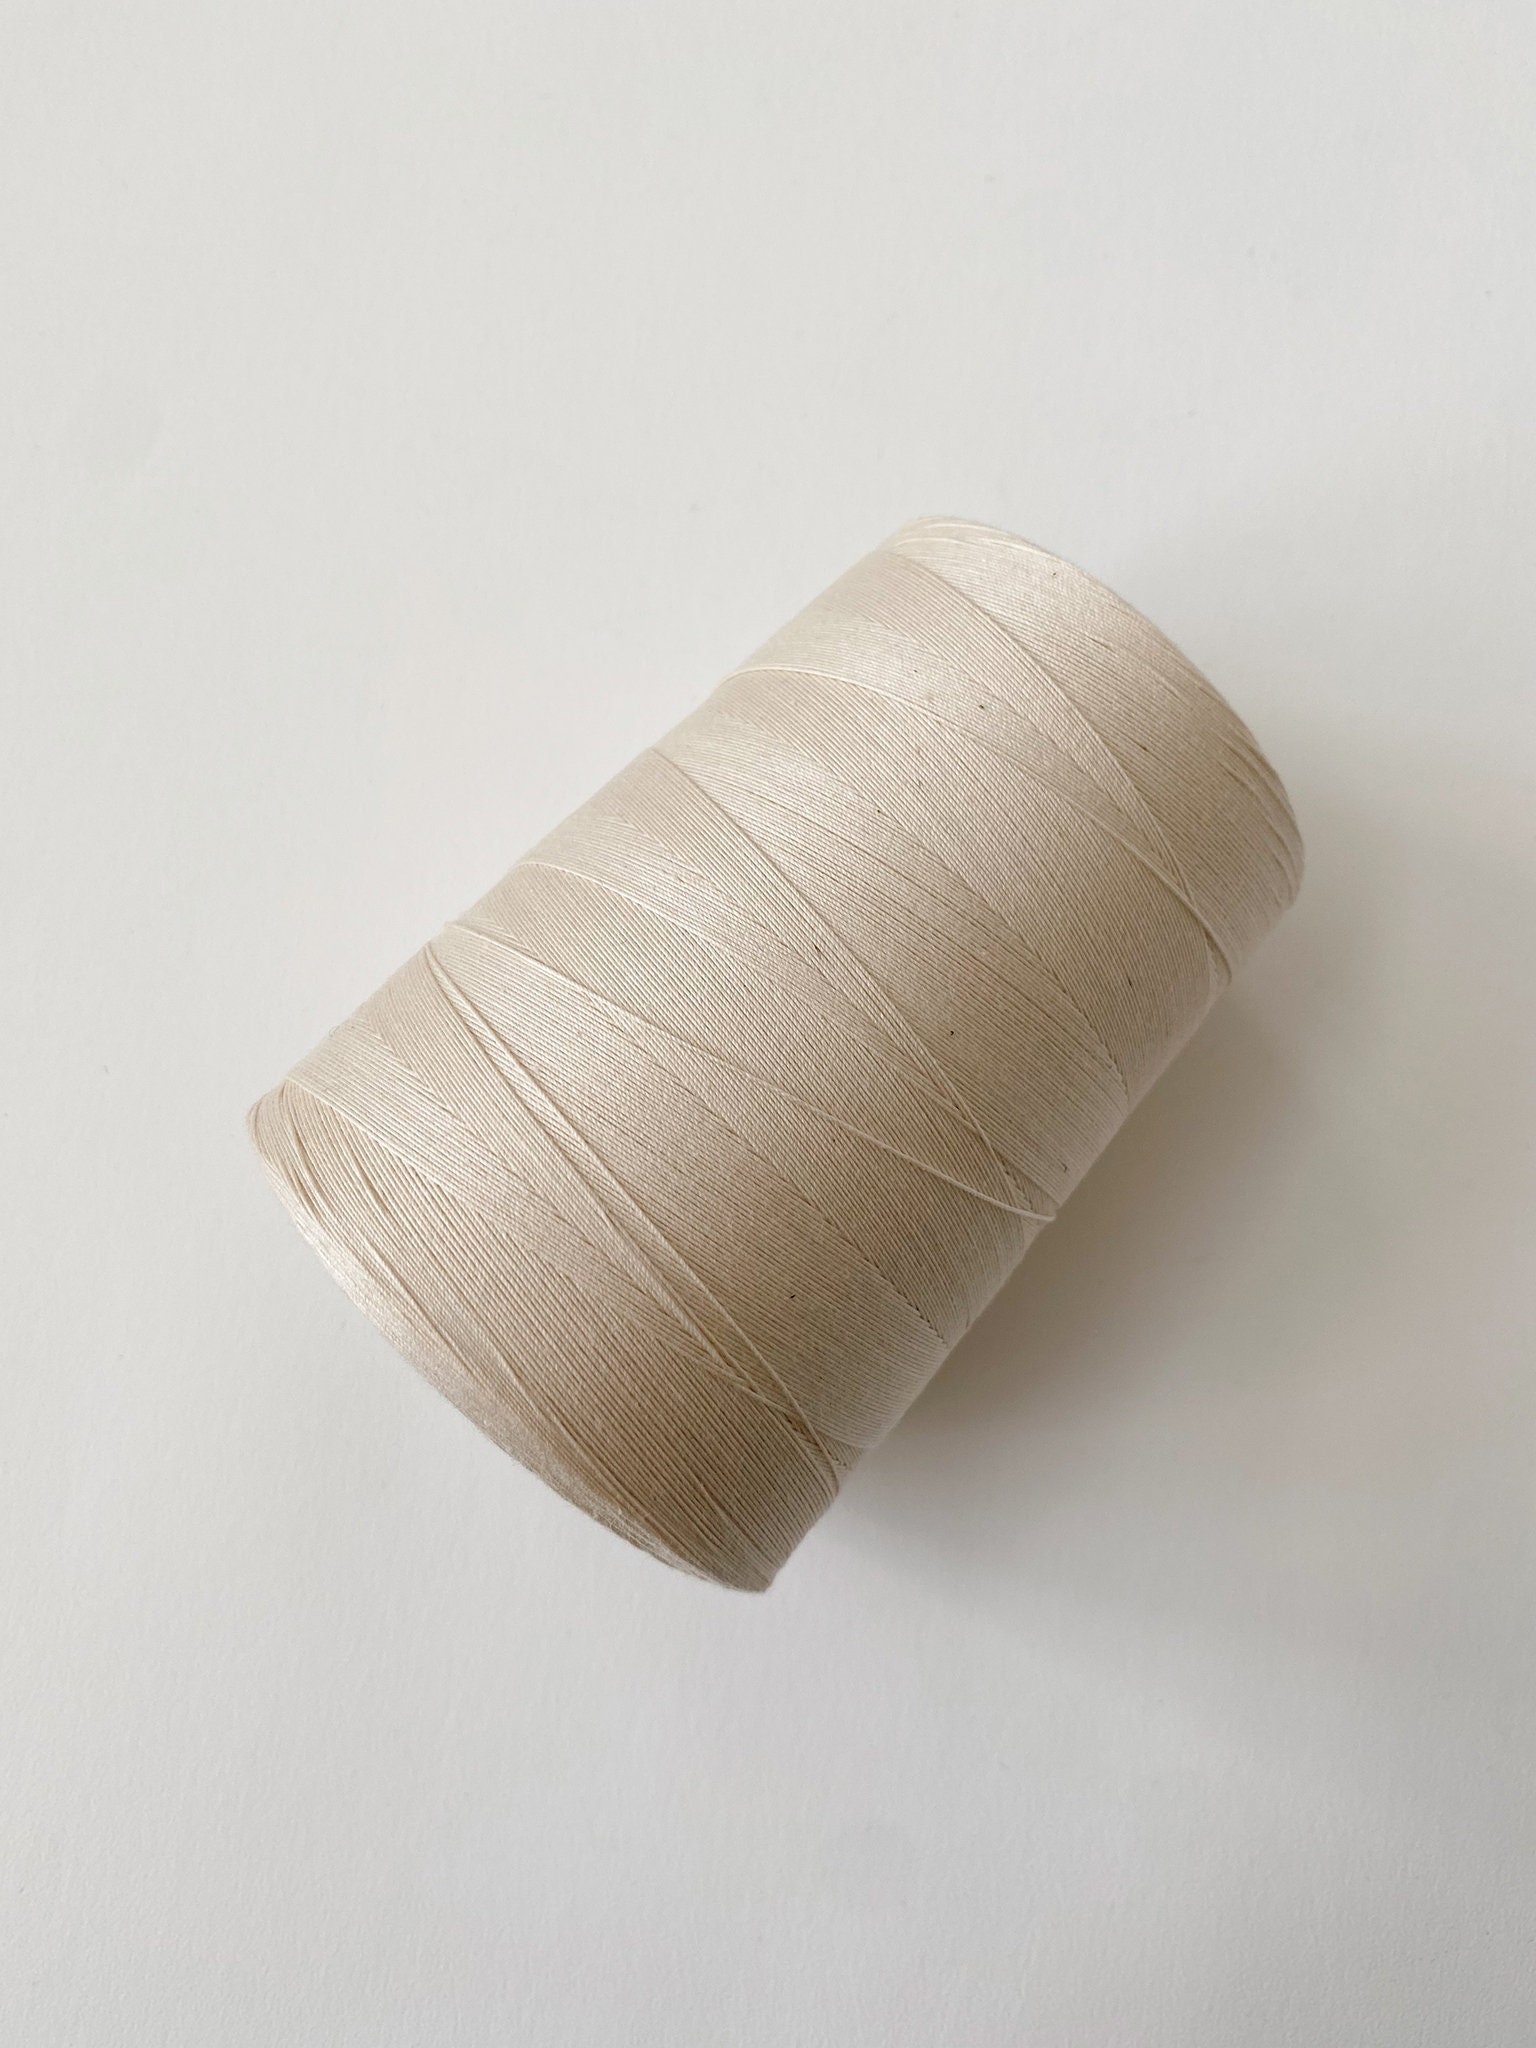 100 Cotton Thread for Sewing, 100 Cotton Sewing Machine Thread,  Multi-purpose Cotton Threads, for Machine Quilting, Sewing and Embroidery 